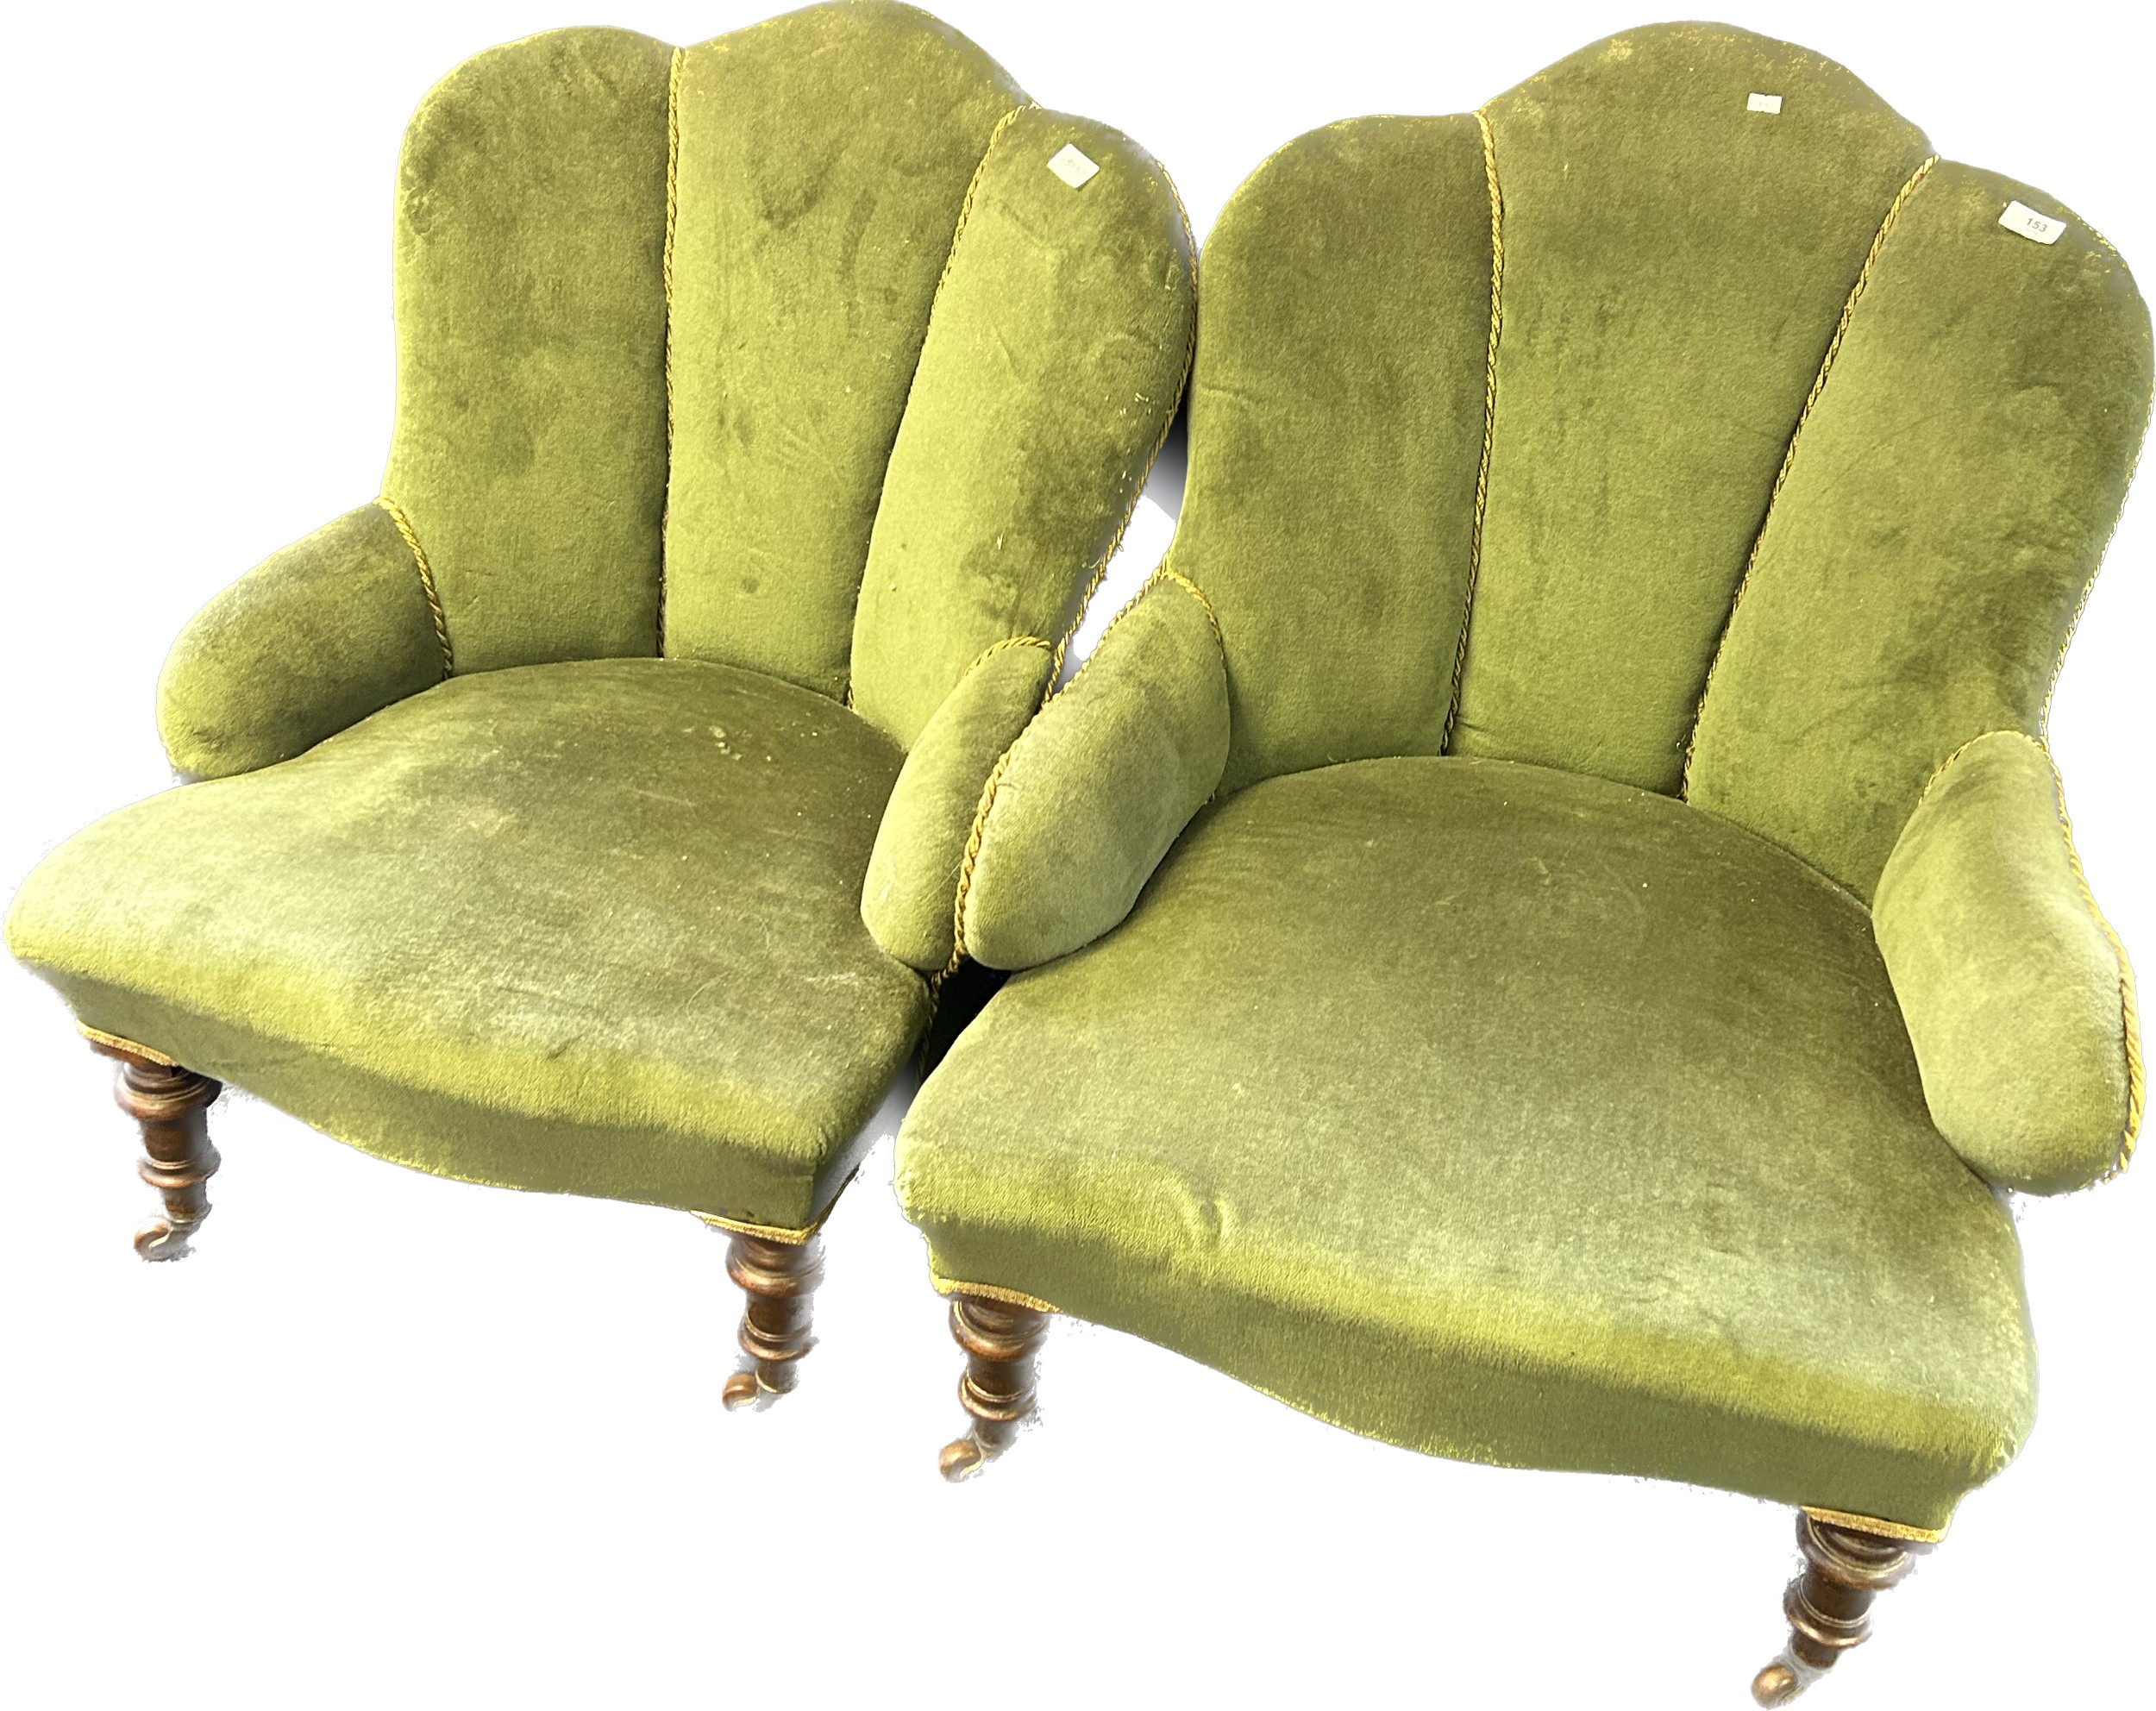 Pair of art deco cushioned chairs, covered in a green upholstery, raised on turned tapered legs - Image 5 of 5